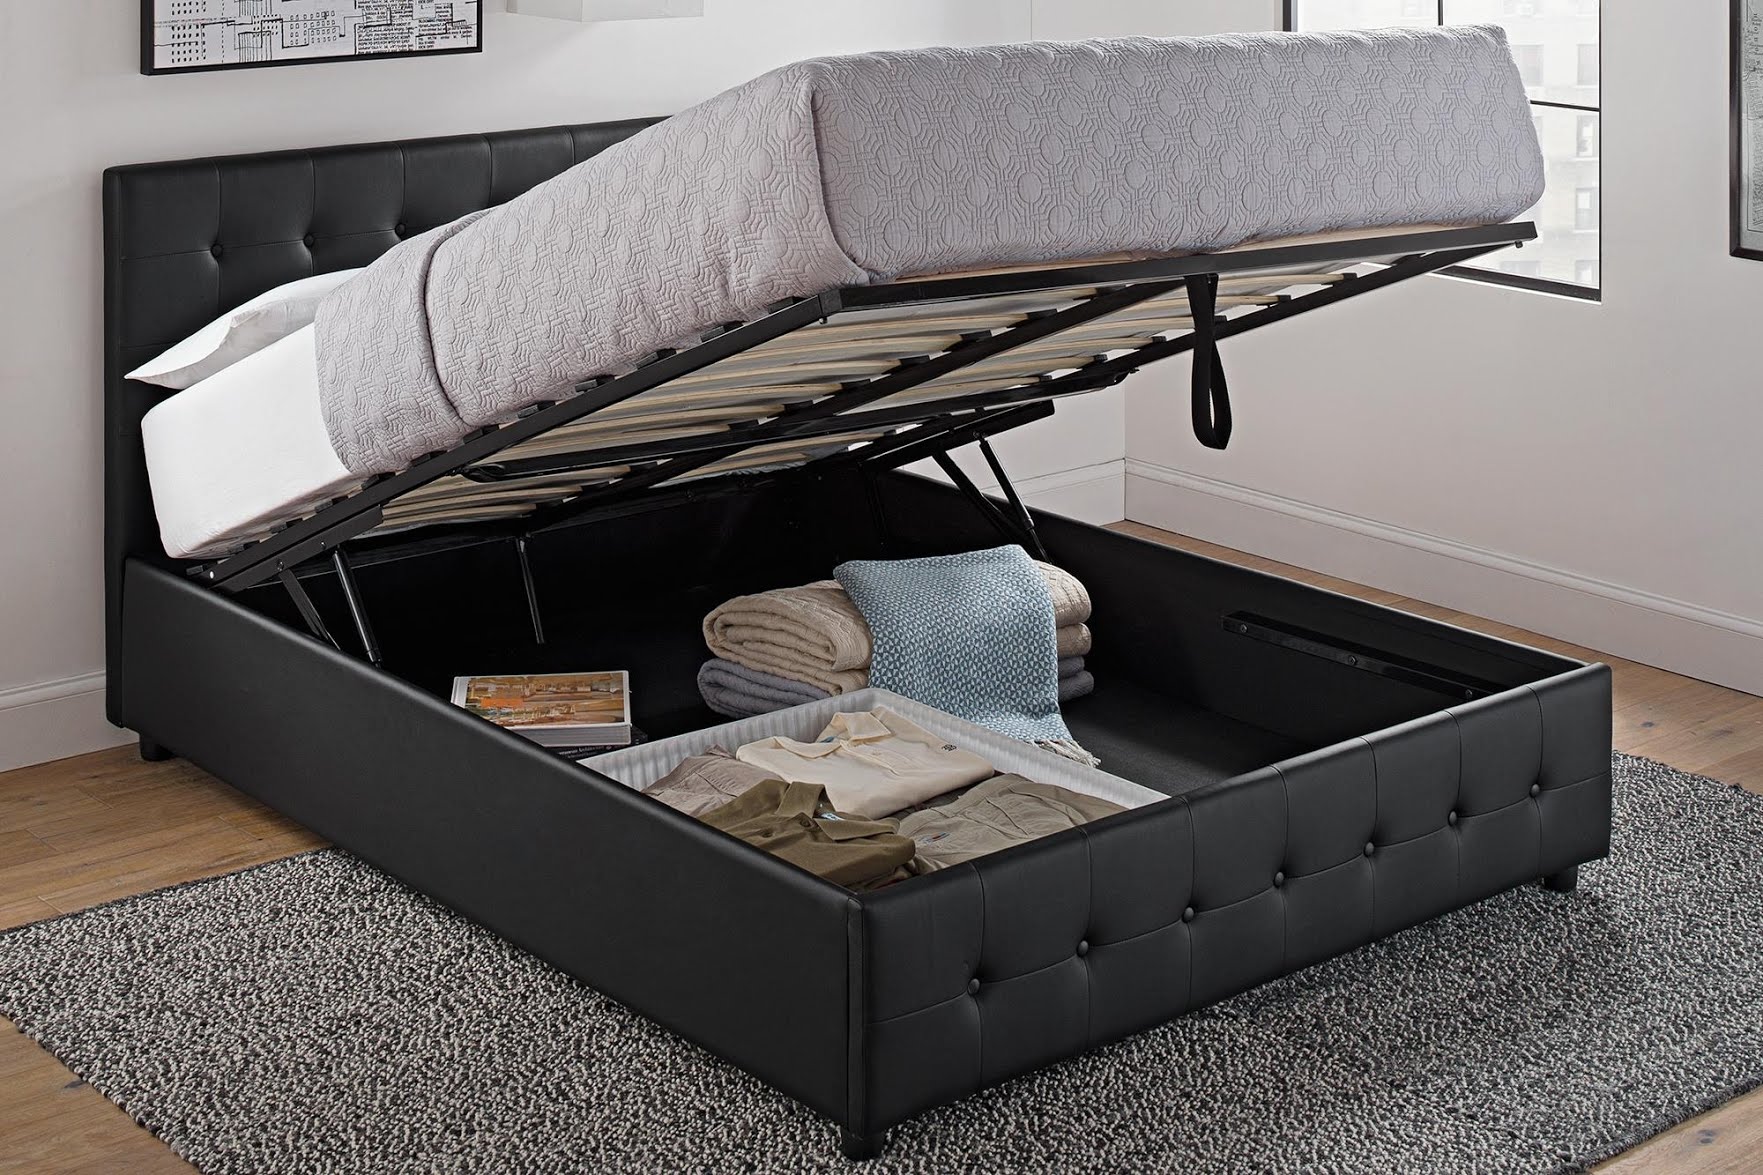 Lift Up Storage Bed Visualhunt, Bed Frame With Pull Up Storage